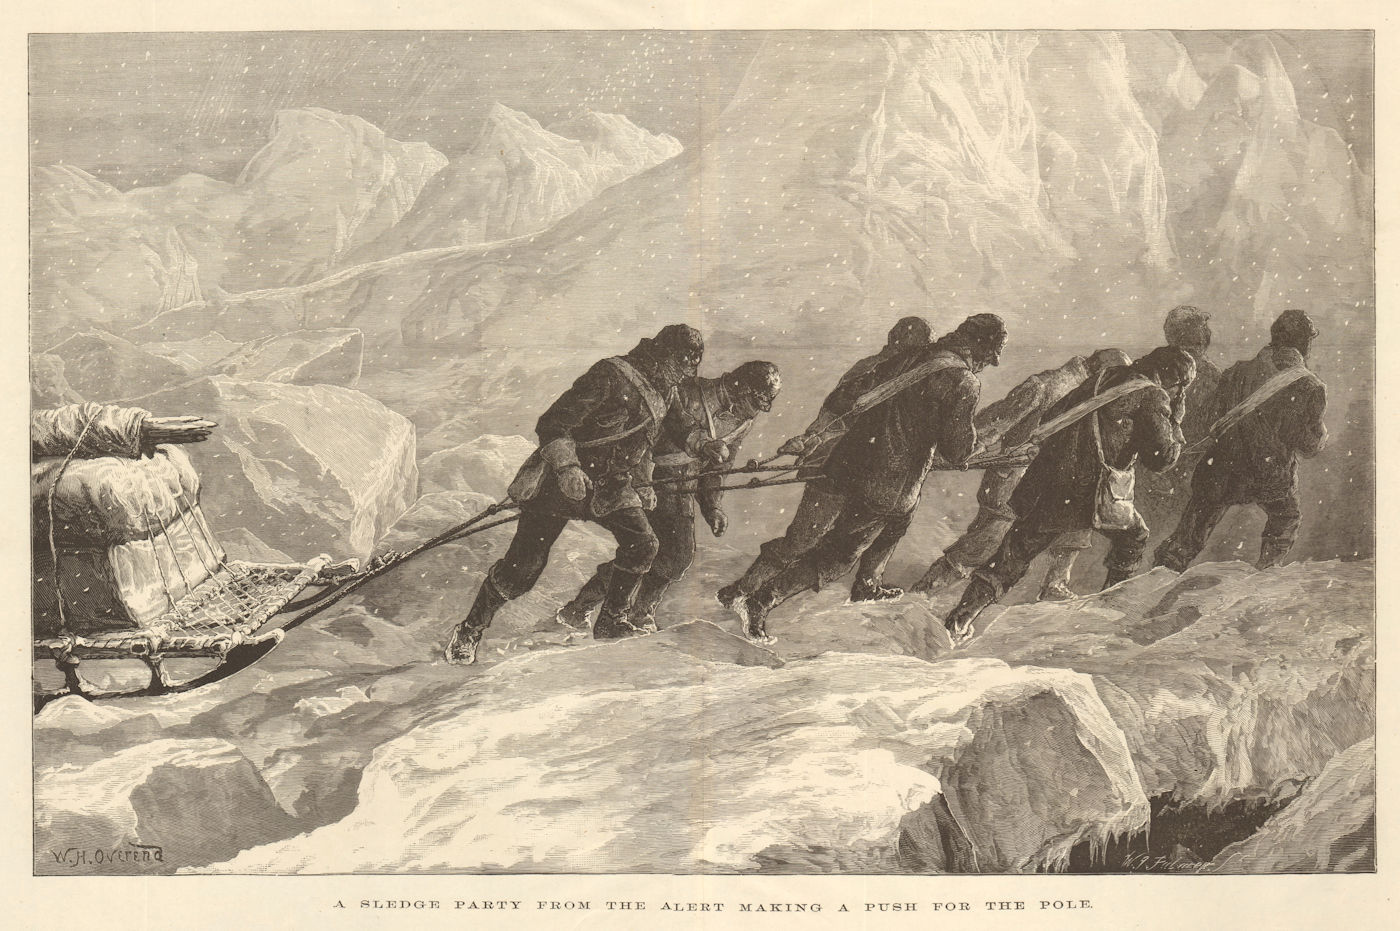 Associate Product Arctic Expedition: the Alert's sledge party heading for the North Pole 1876